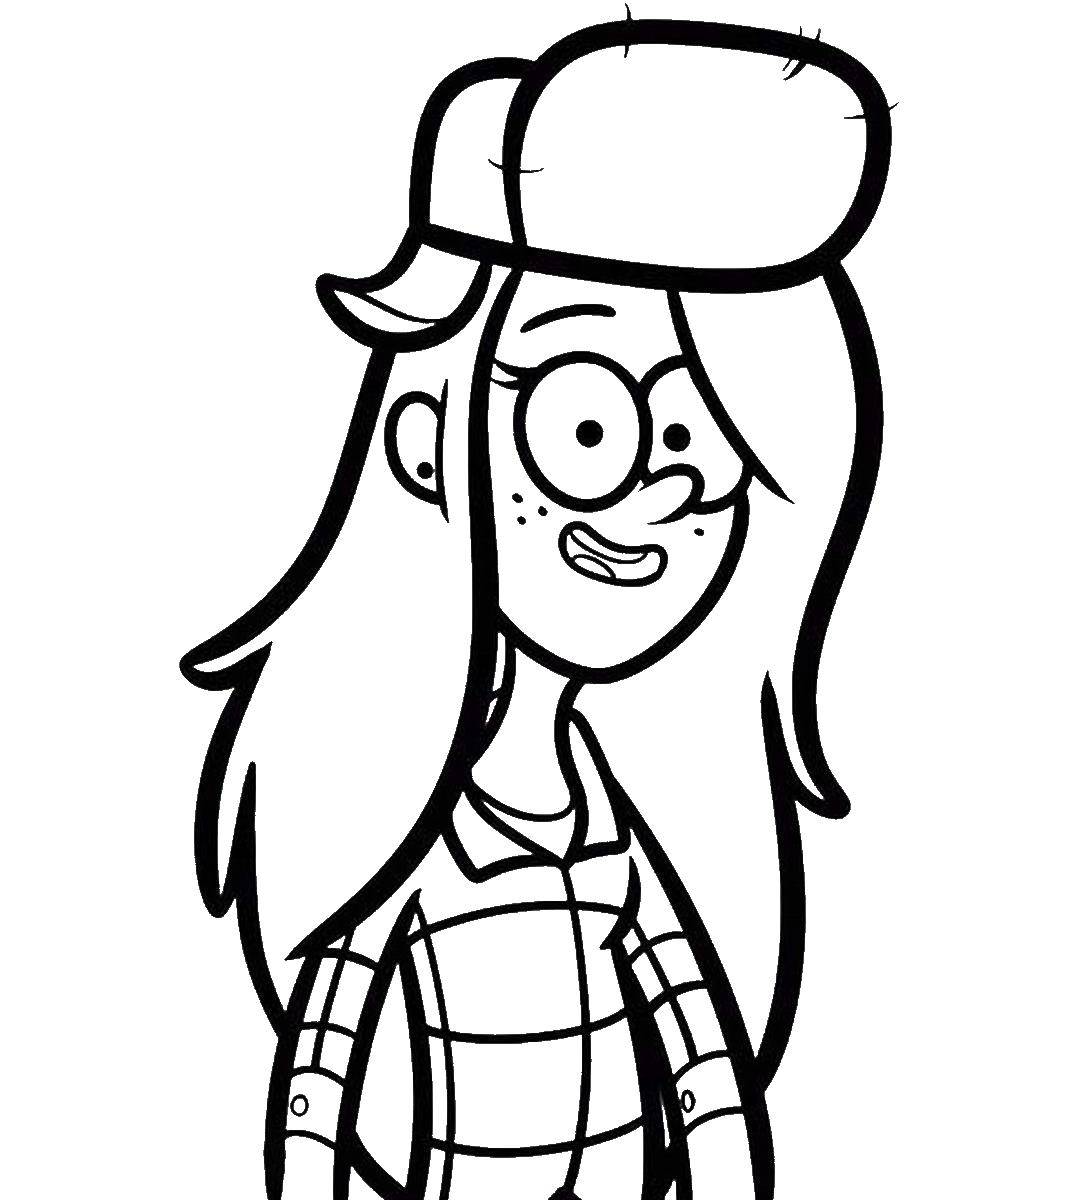 Coloring The characters from the cartoon gravity falls. Category Cartoon character. Tags:  Cartoon character.